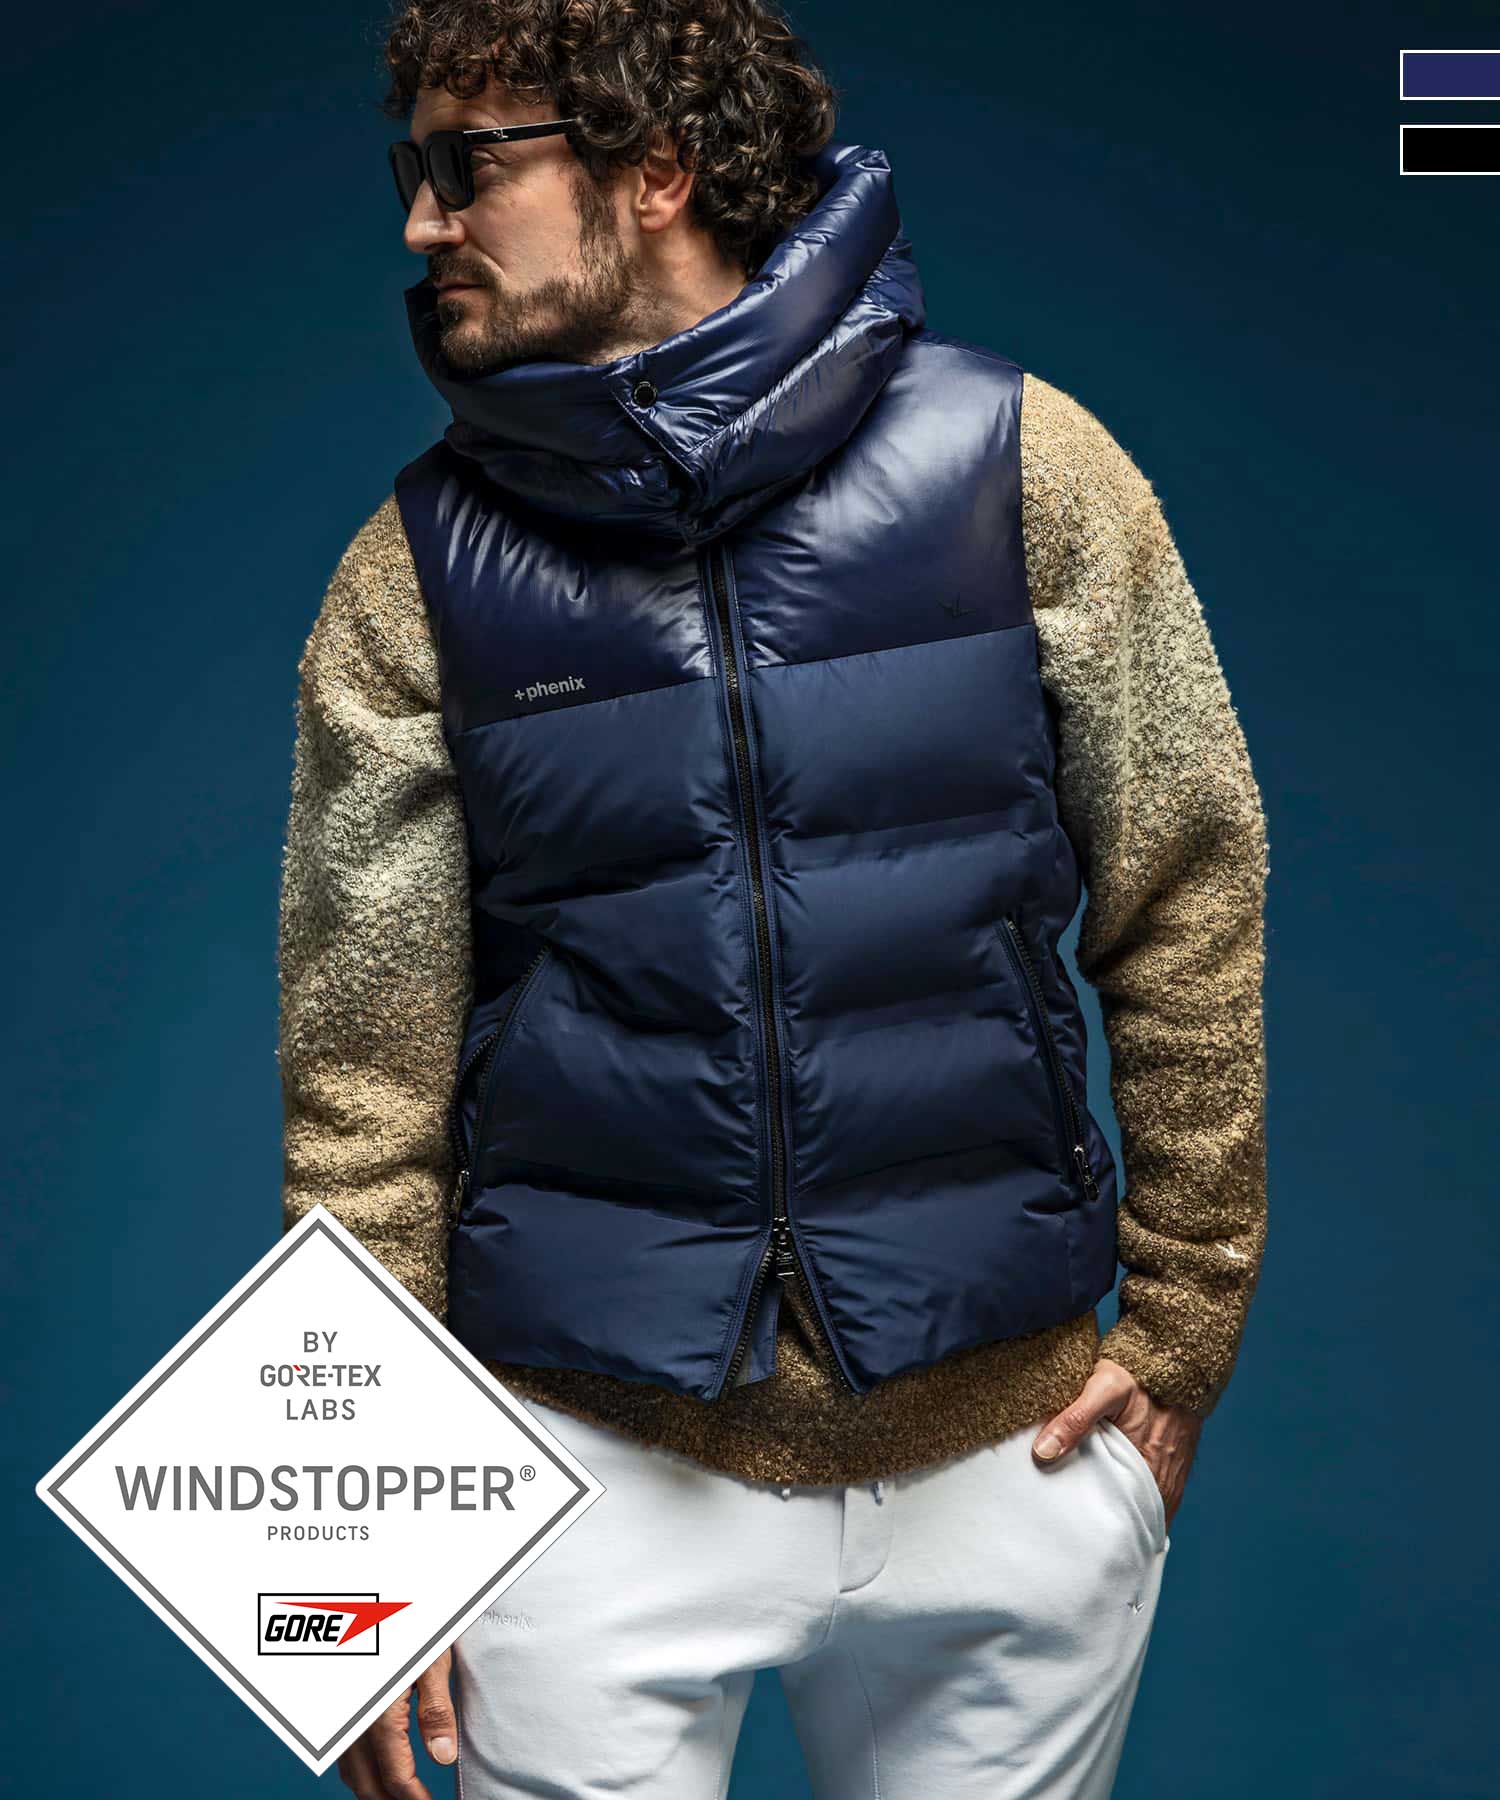 MENS】コンビダウンベスト WINDSTOPPER(R) プロダクト by GORE-TEX